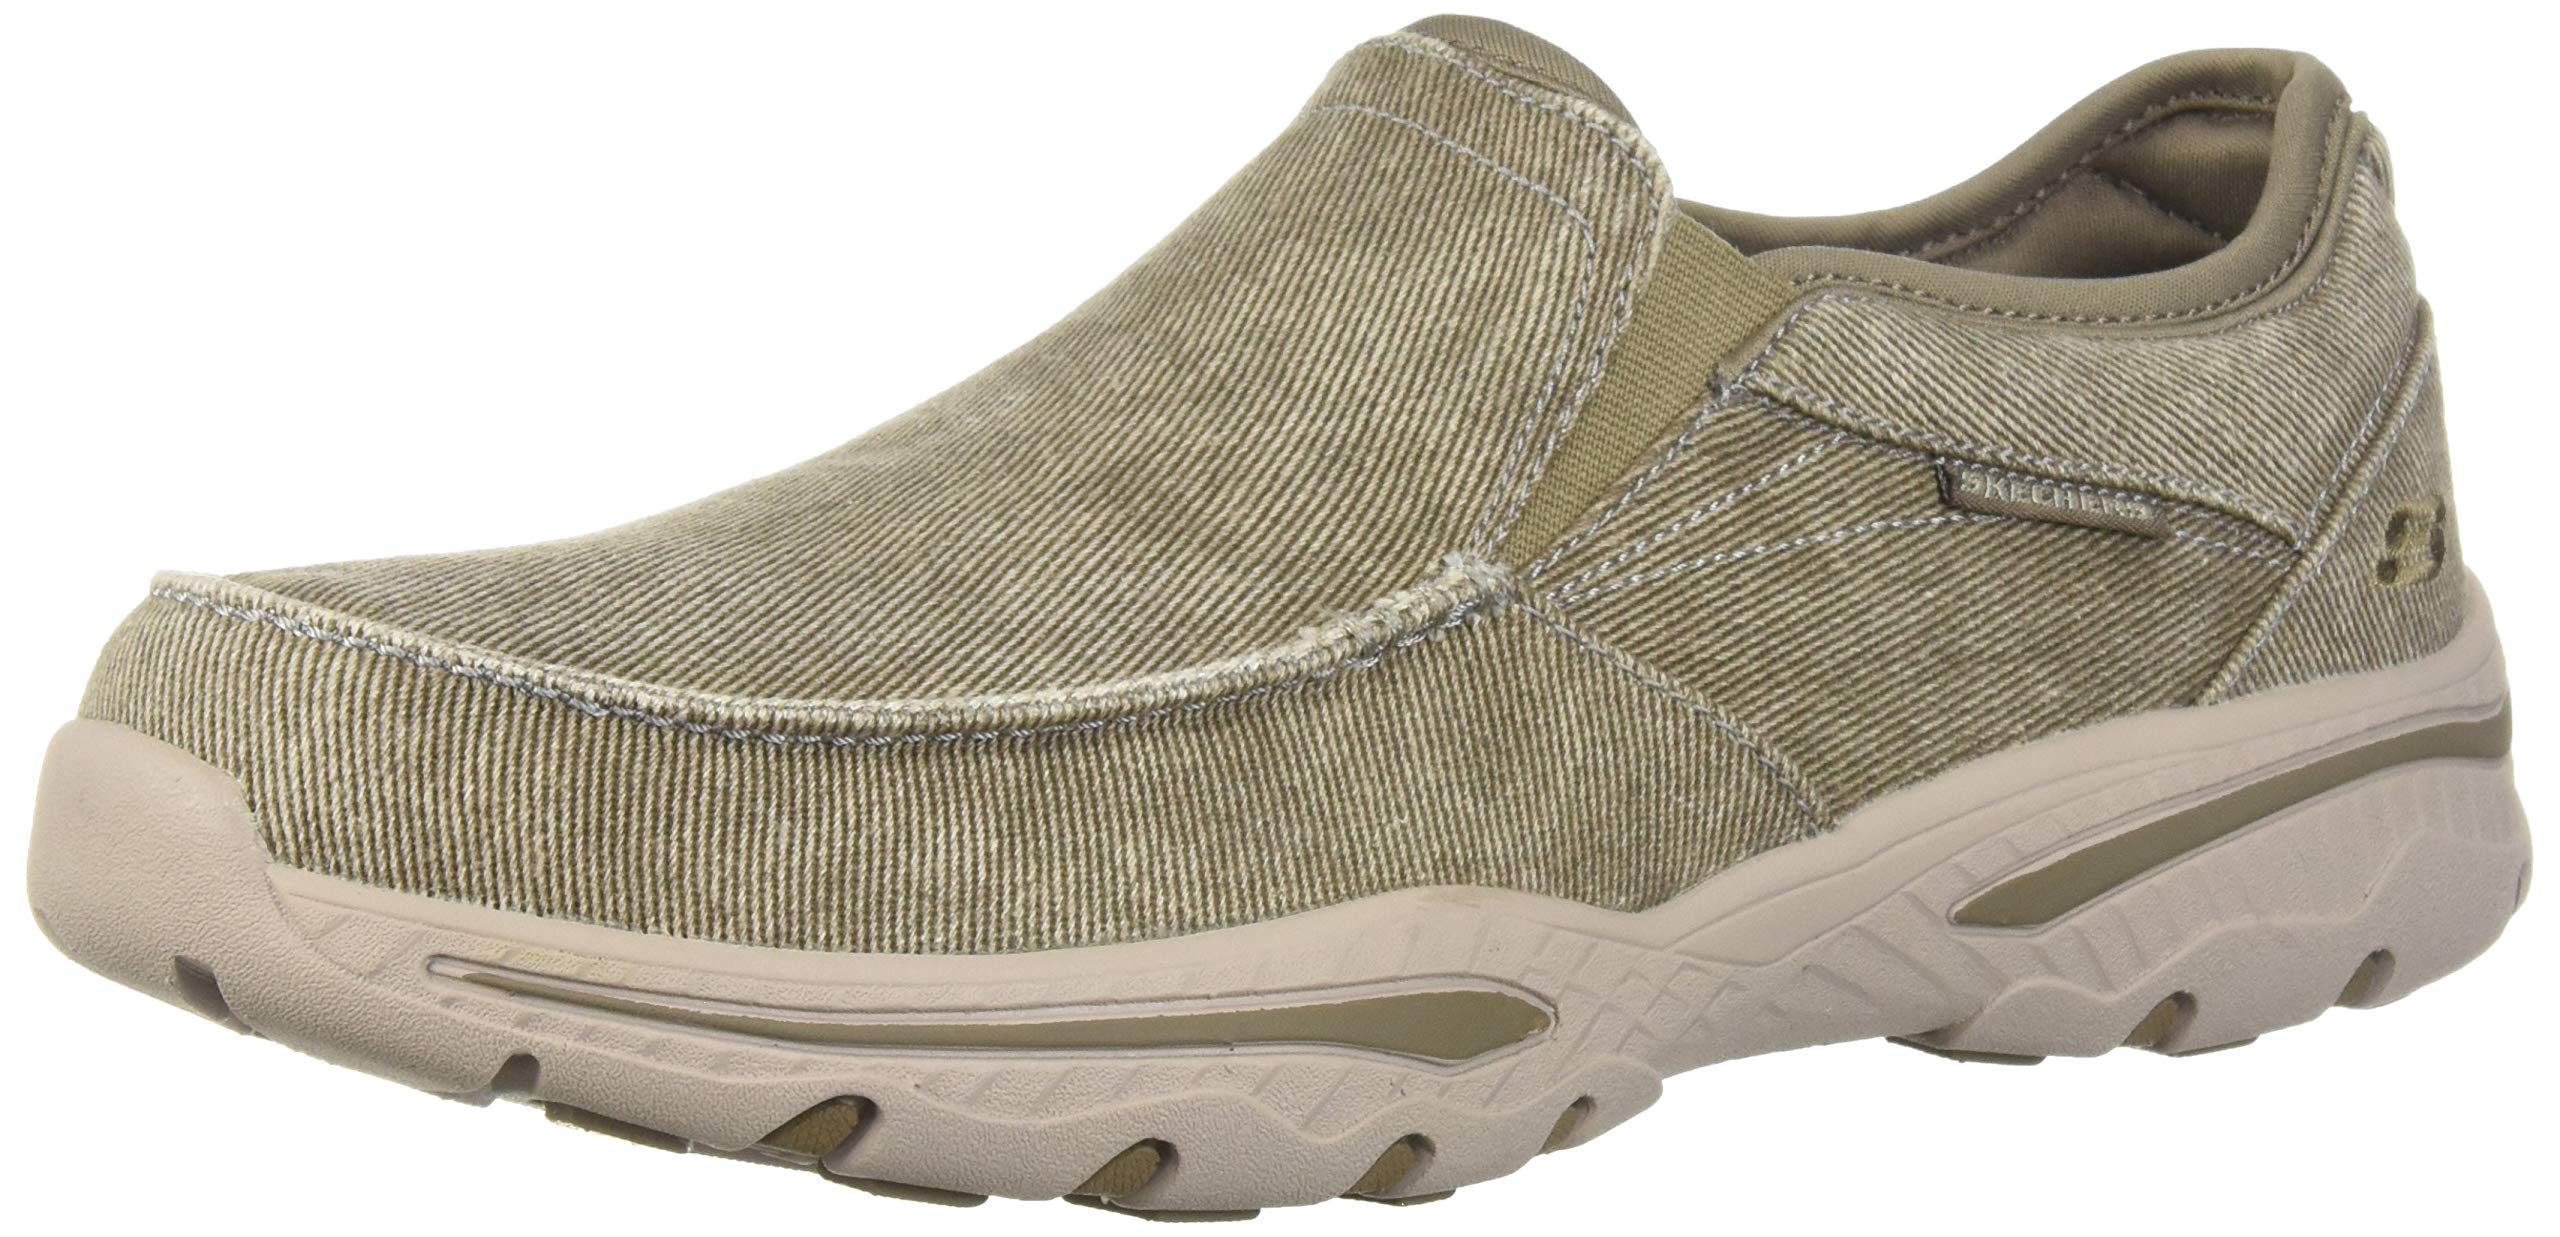 Skechers Men's Relaxed Fit-Creston-Moseco